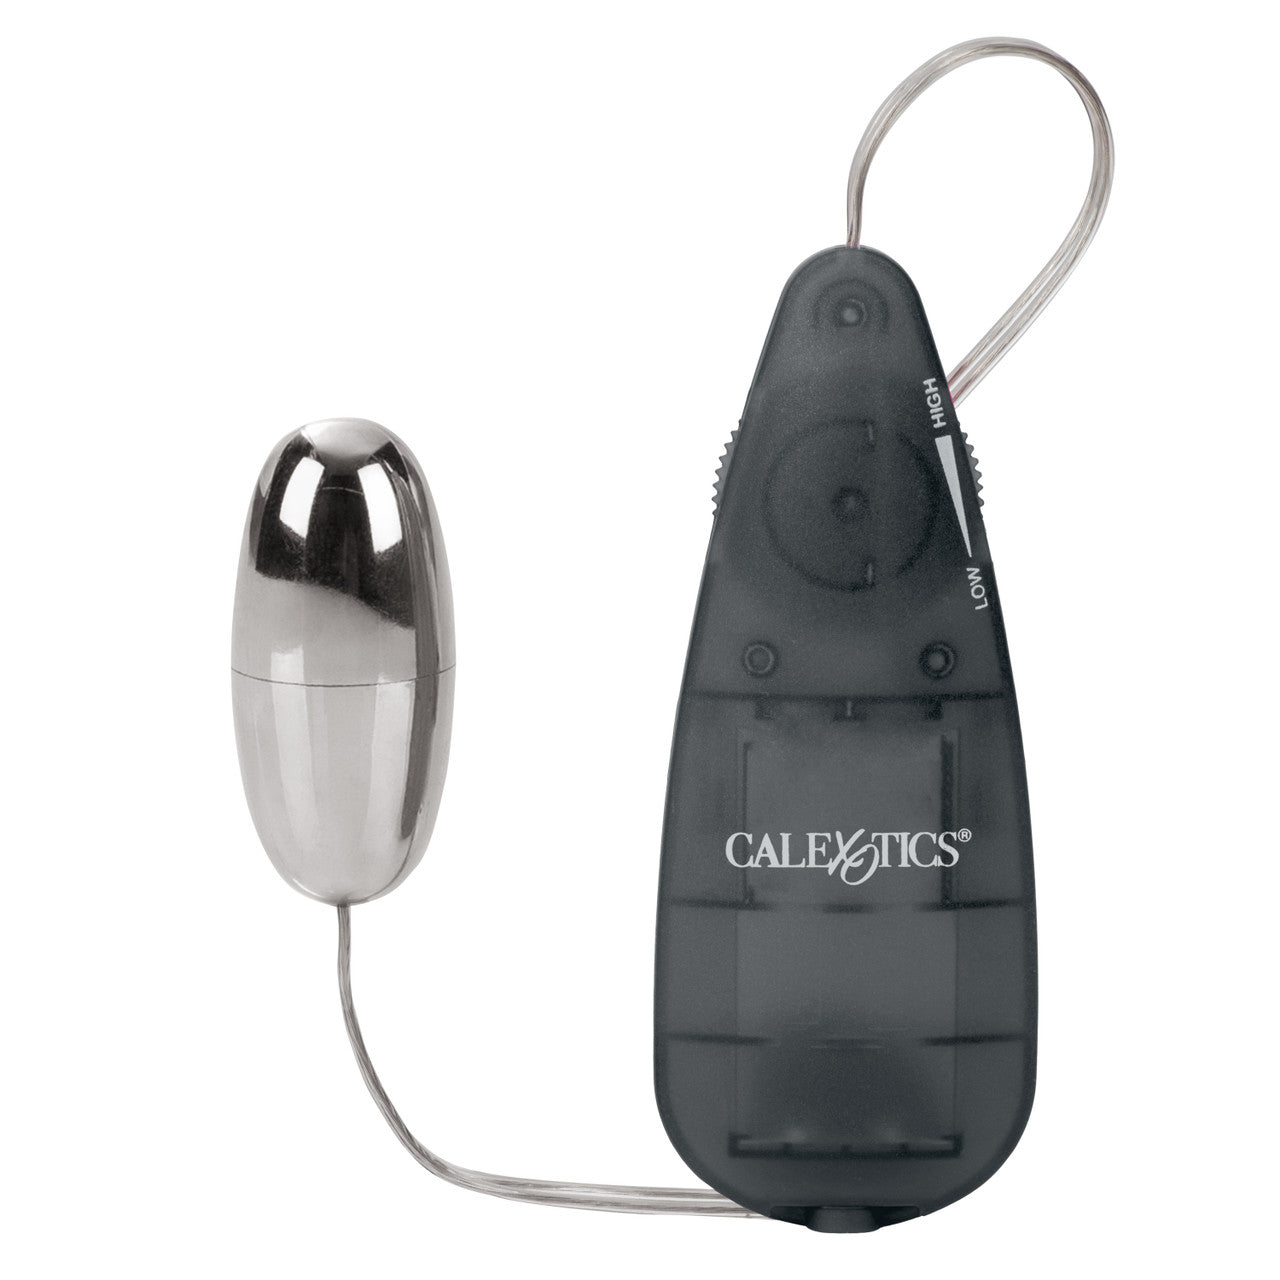 Booty Call Booty Vibro Kit - Black - Thorn & Feather Sex Toy Canada